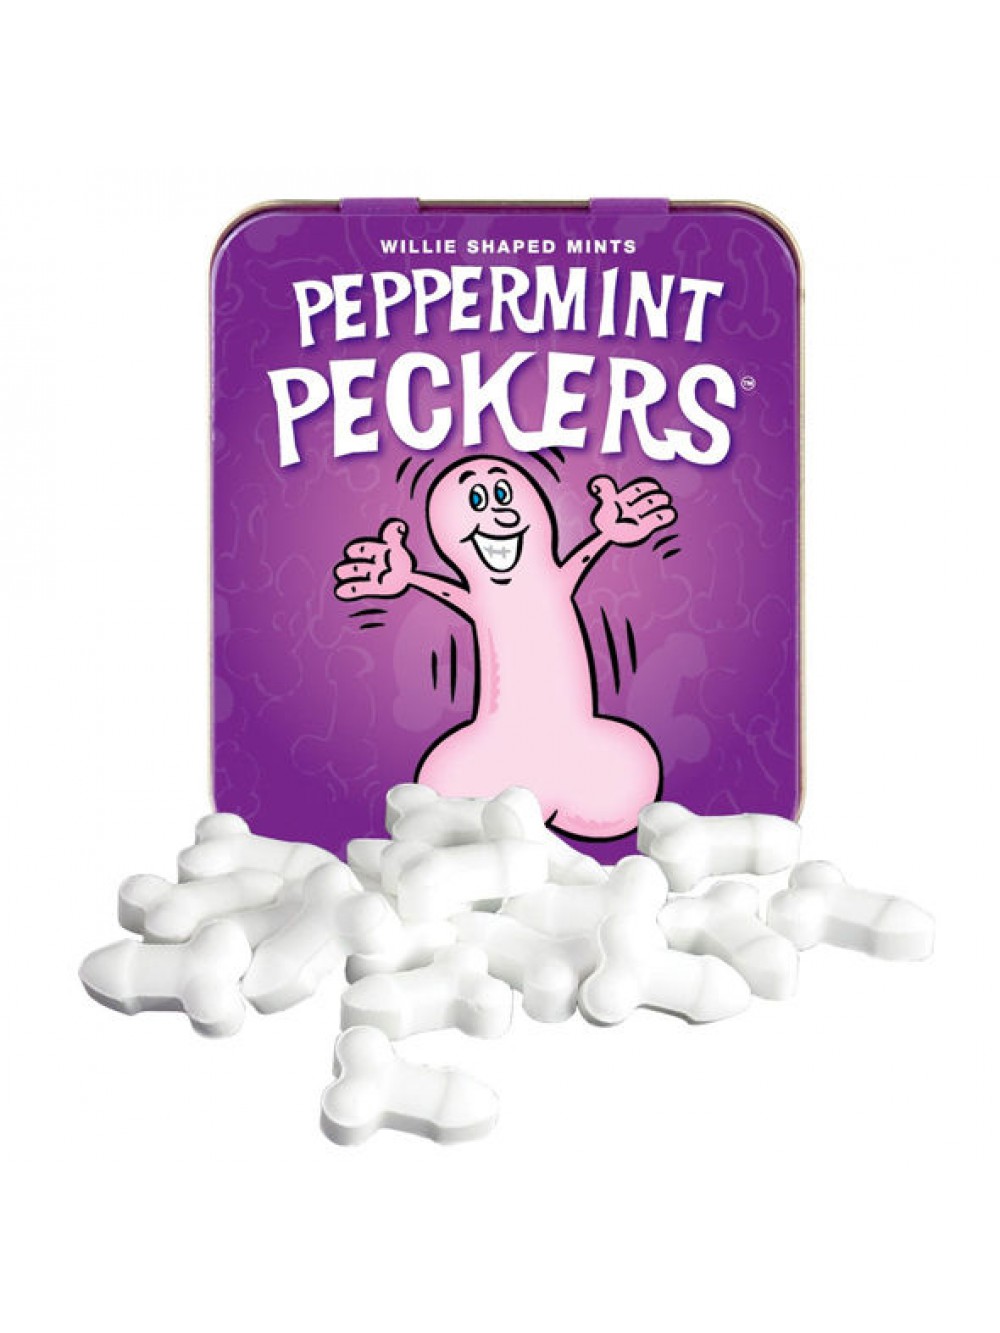 PEPPERMINT PECKERS WILLIE SHAPED MINTS 5022782888541